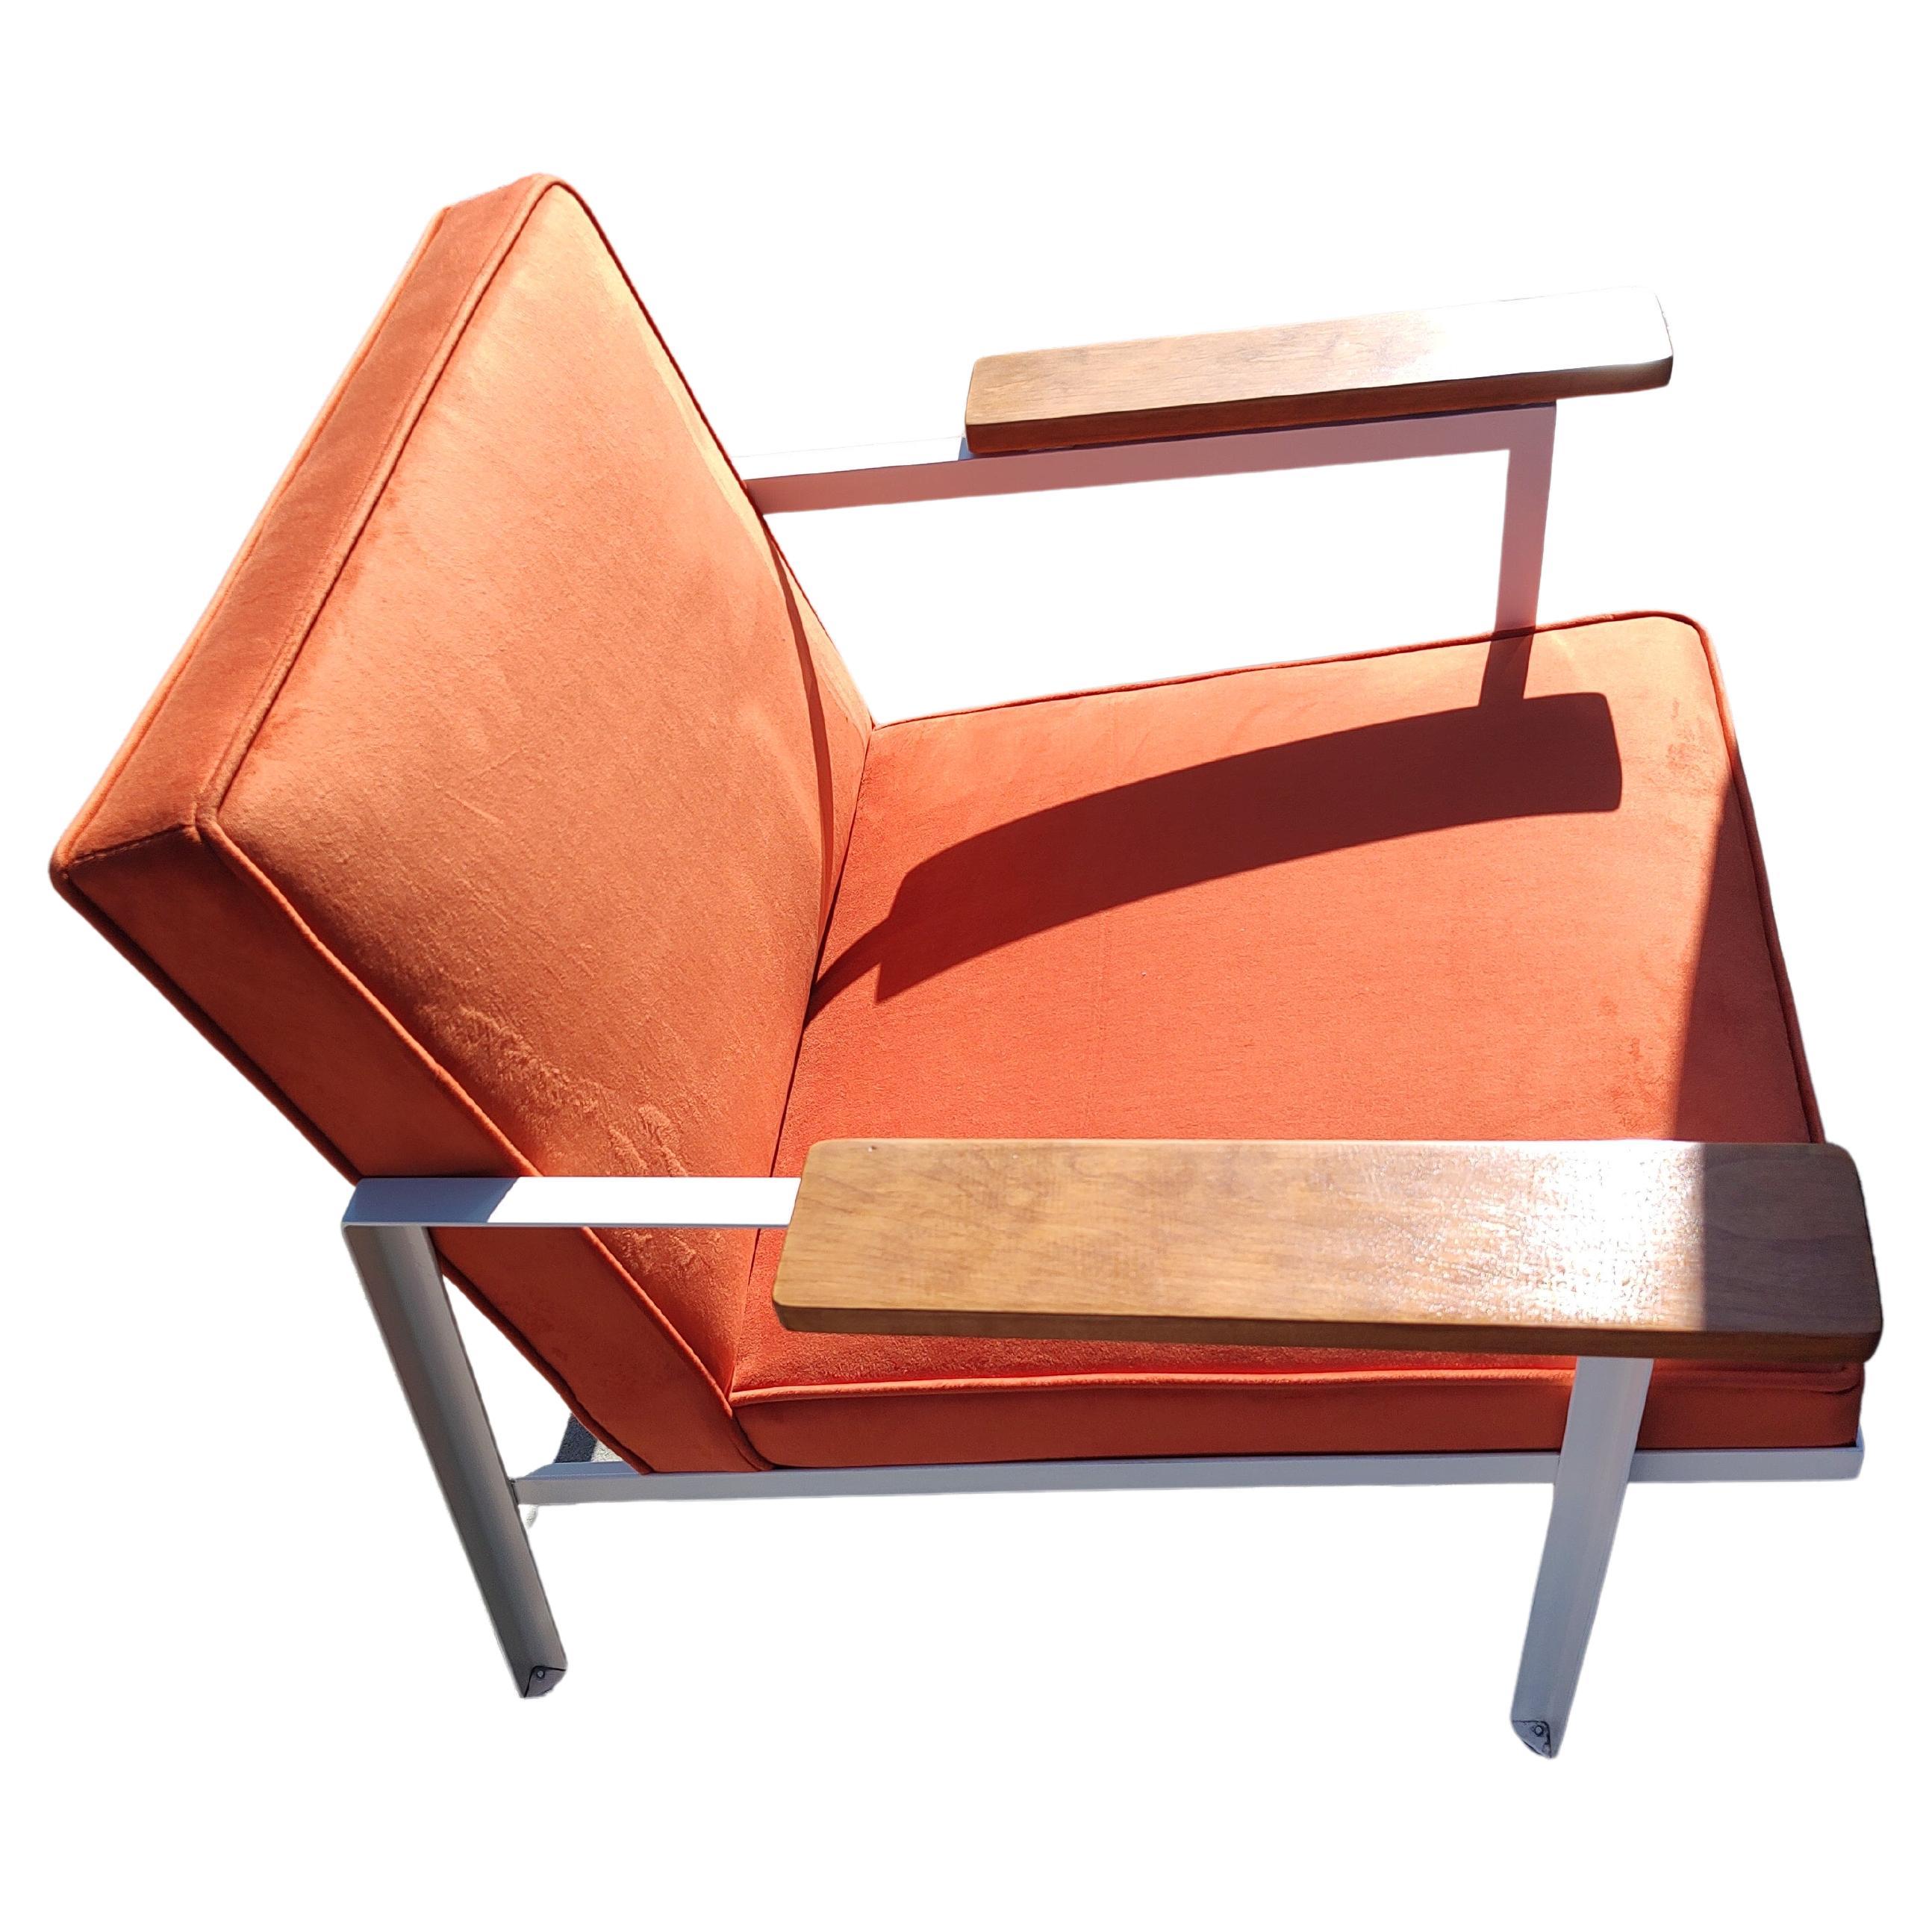 Steel Pair Restored Mid Century Modern Lounge Chairs George Nelson for Herman Miller  For Sale